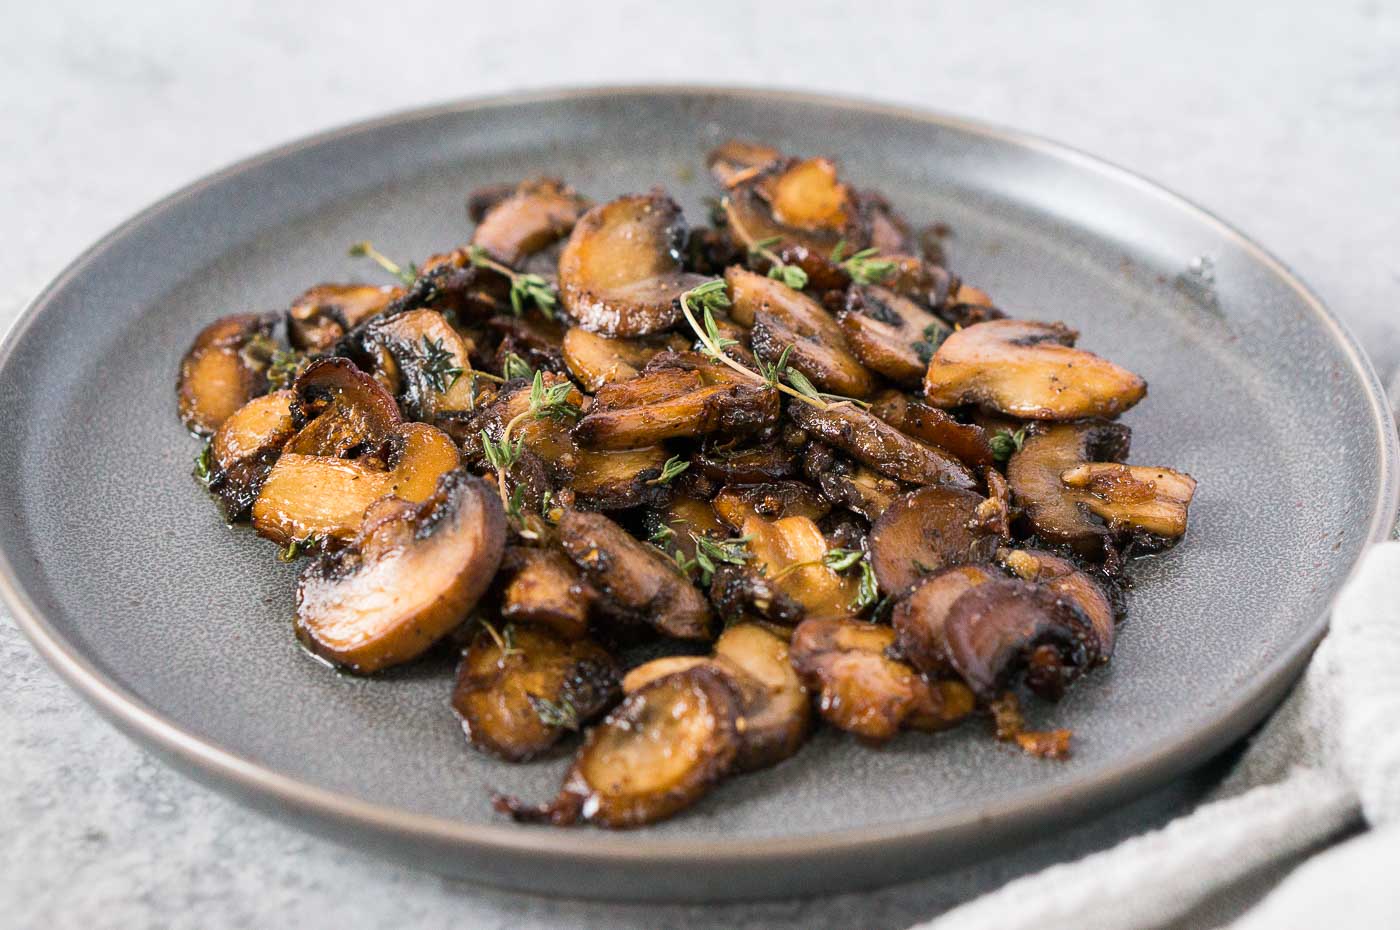 cooked mushrooms on a plate